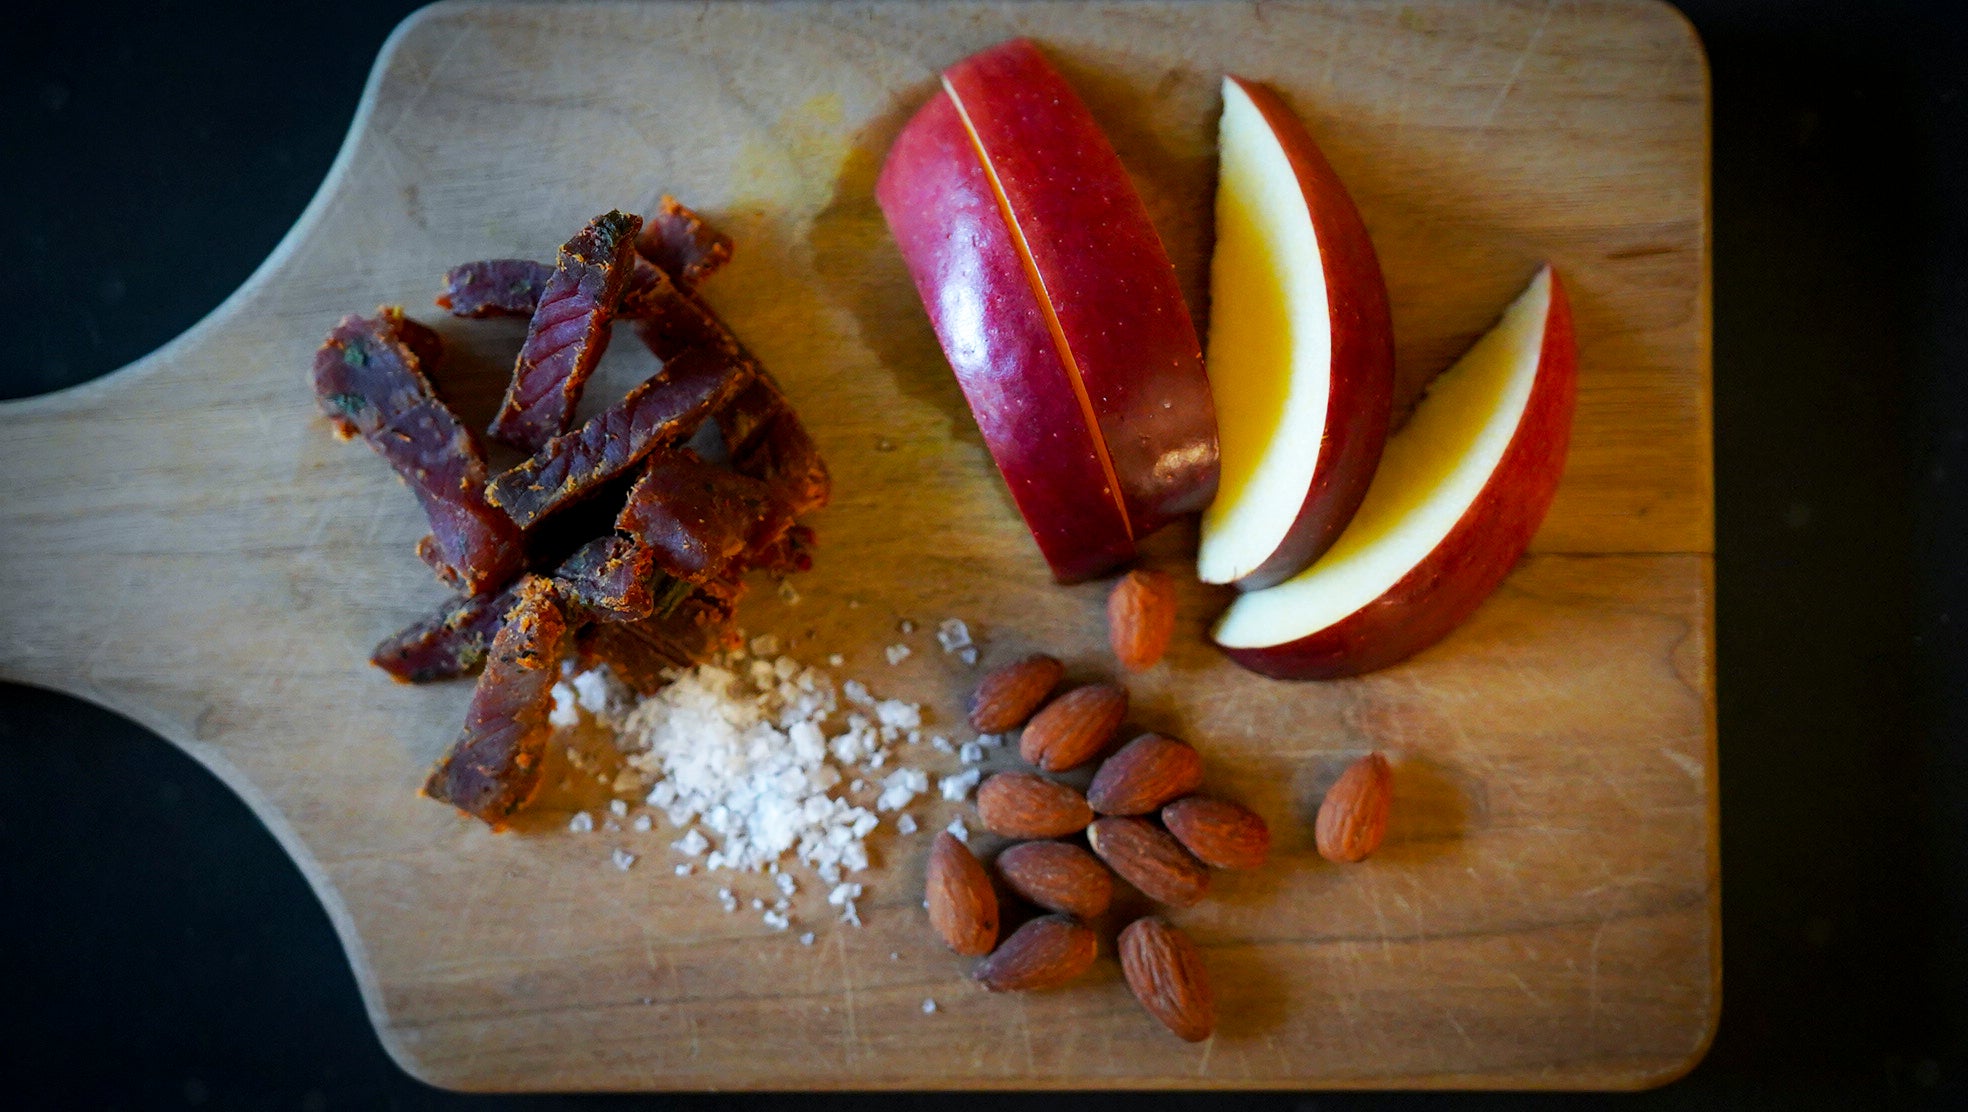 image of apple slices, almonds, and salmon jerky